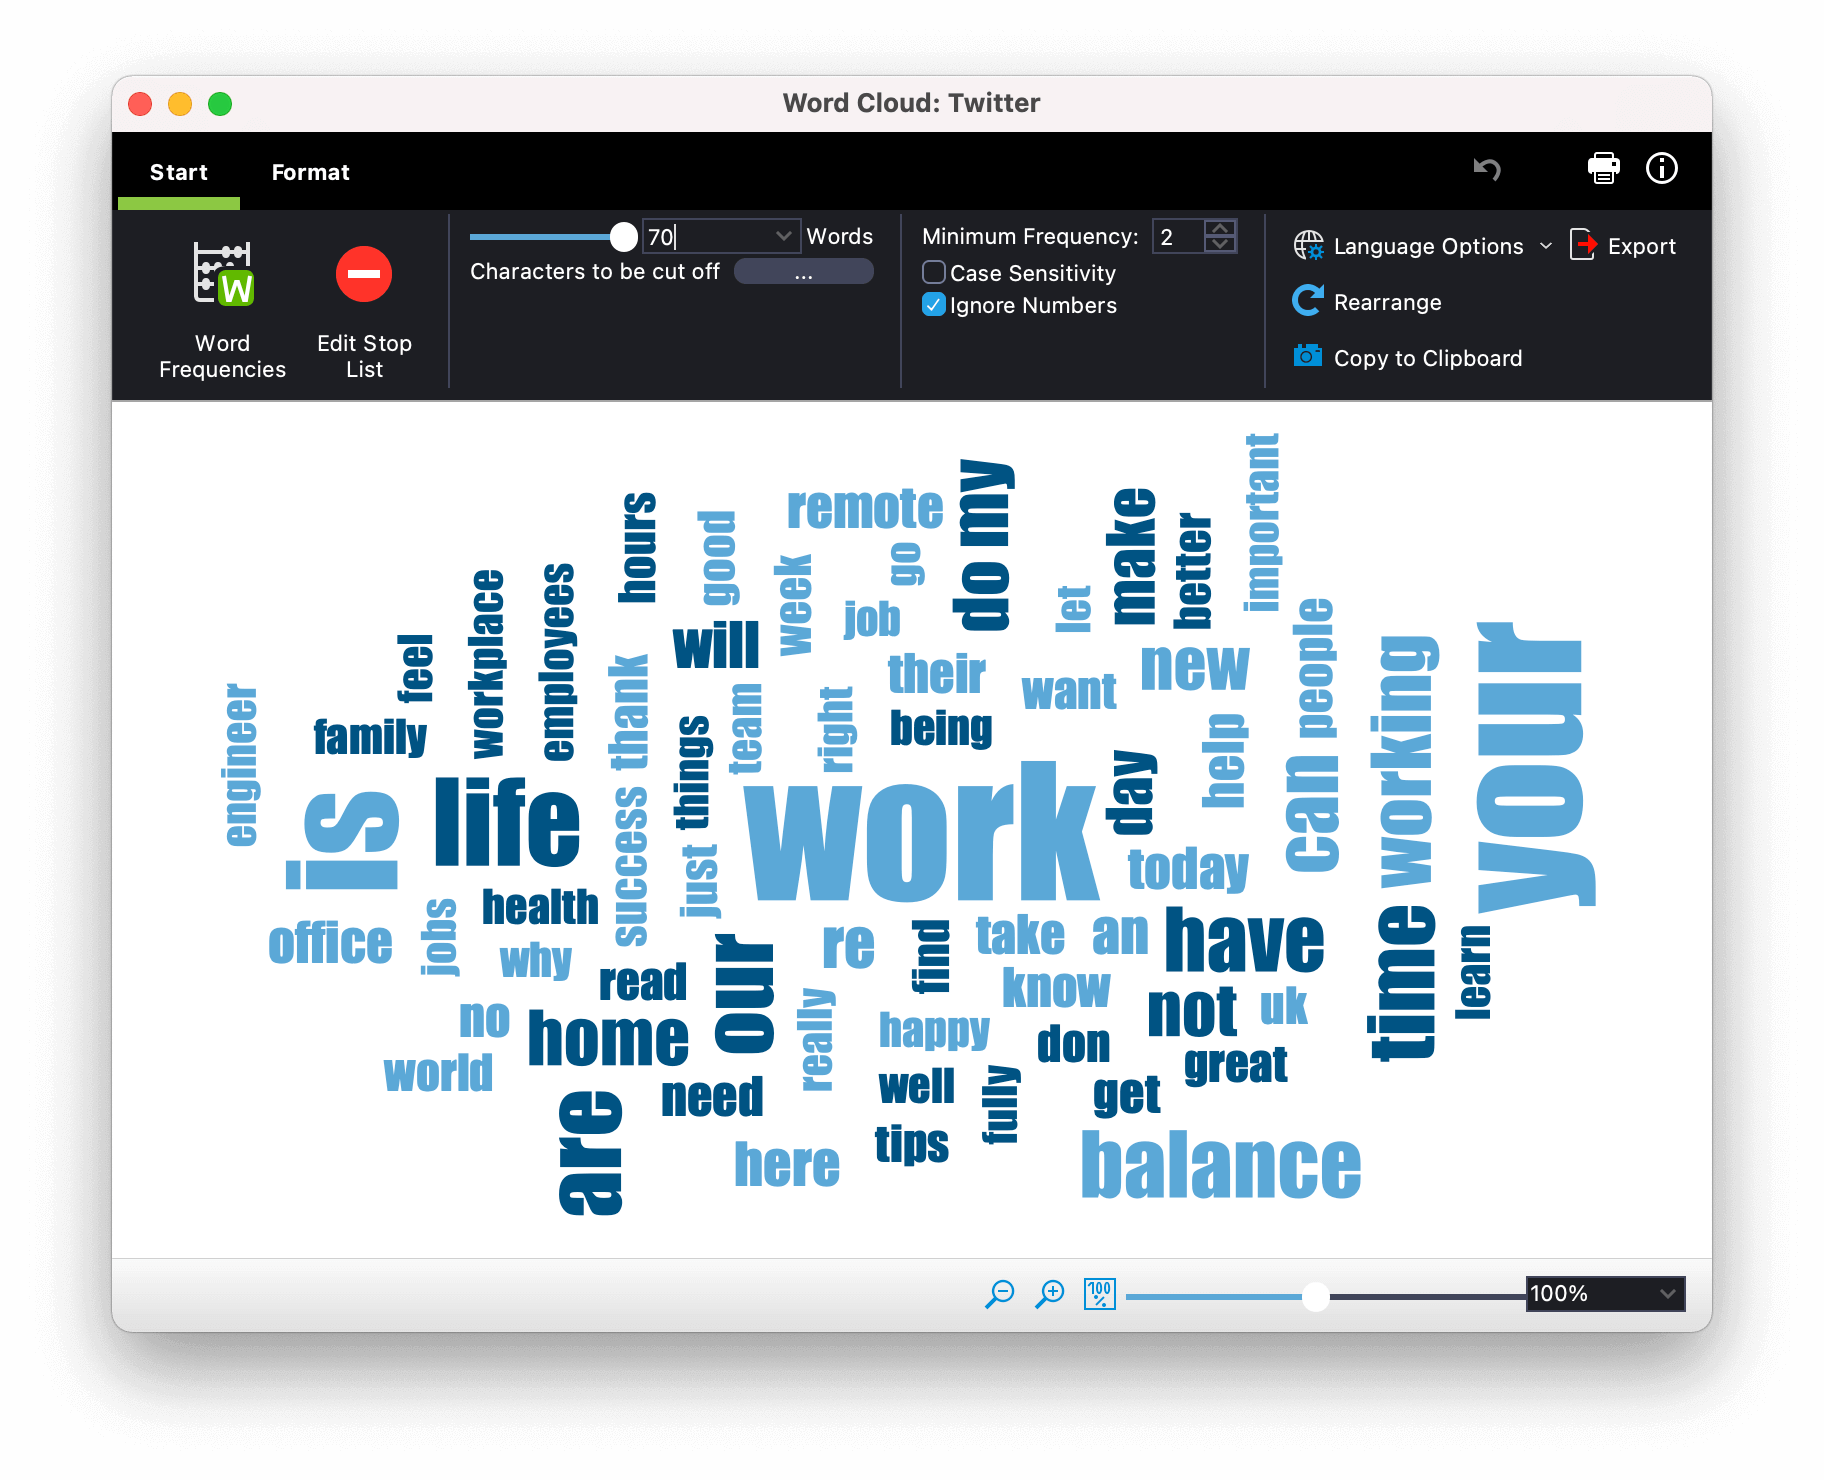 Screenshot from MAXQDA2020 showing a word cloud of terms associated with work/life balance.